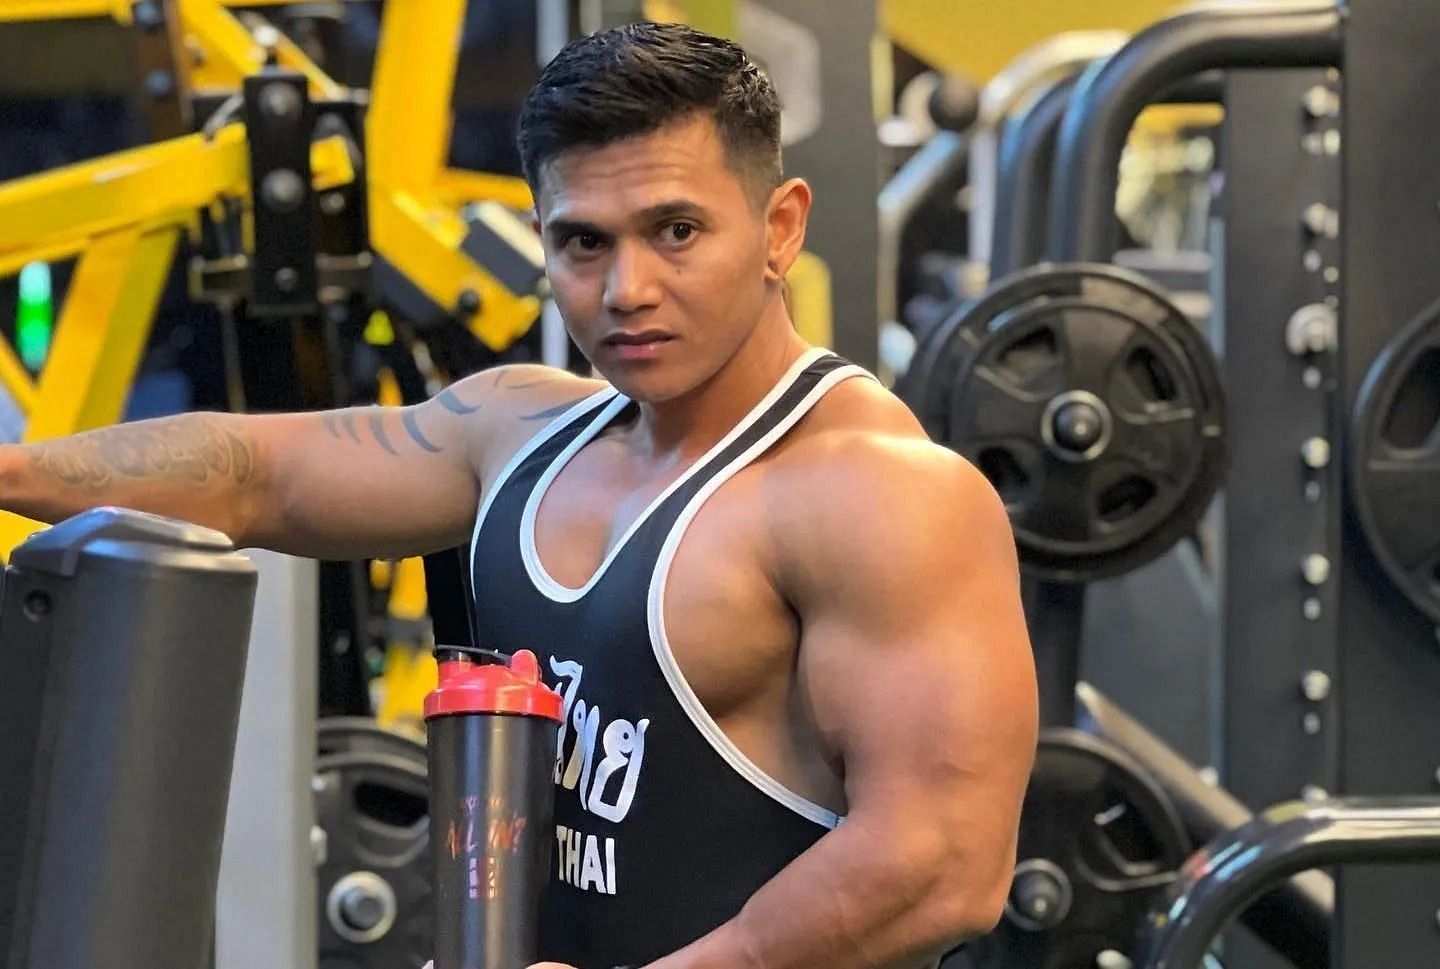 Justyn Vicky died while working out (Image via Instagram/ body_builders.for_life )